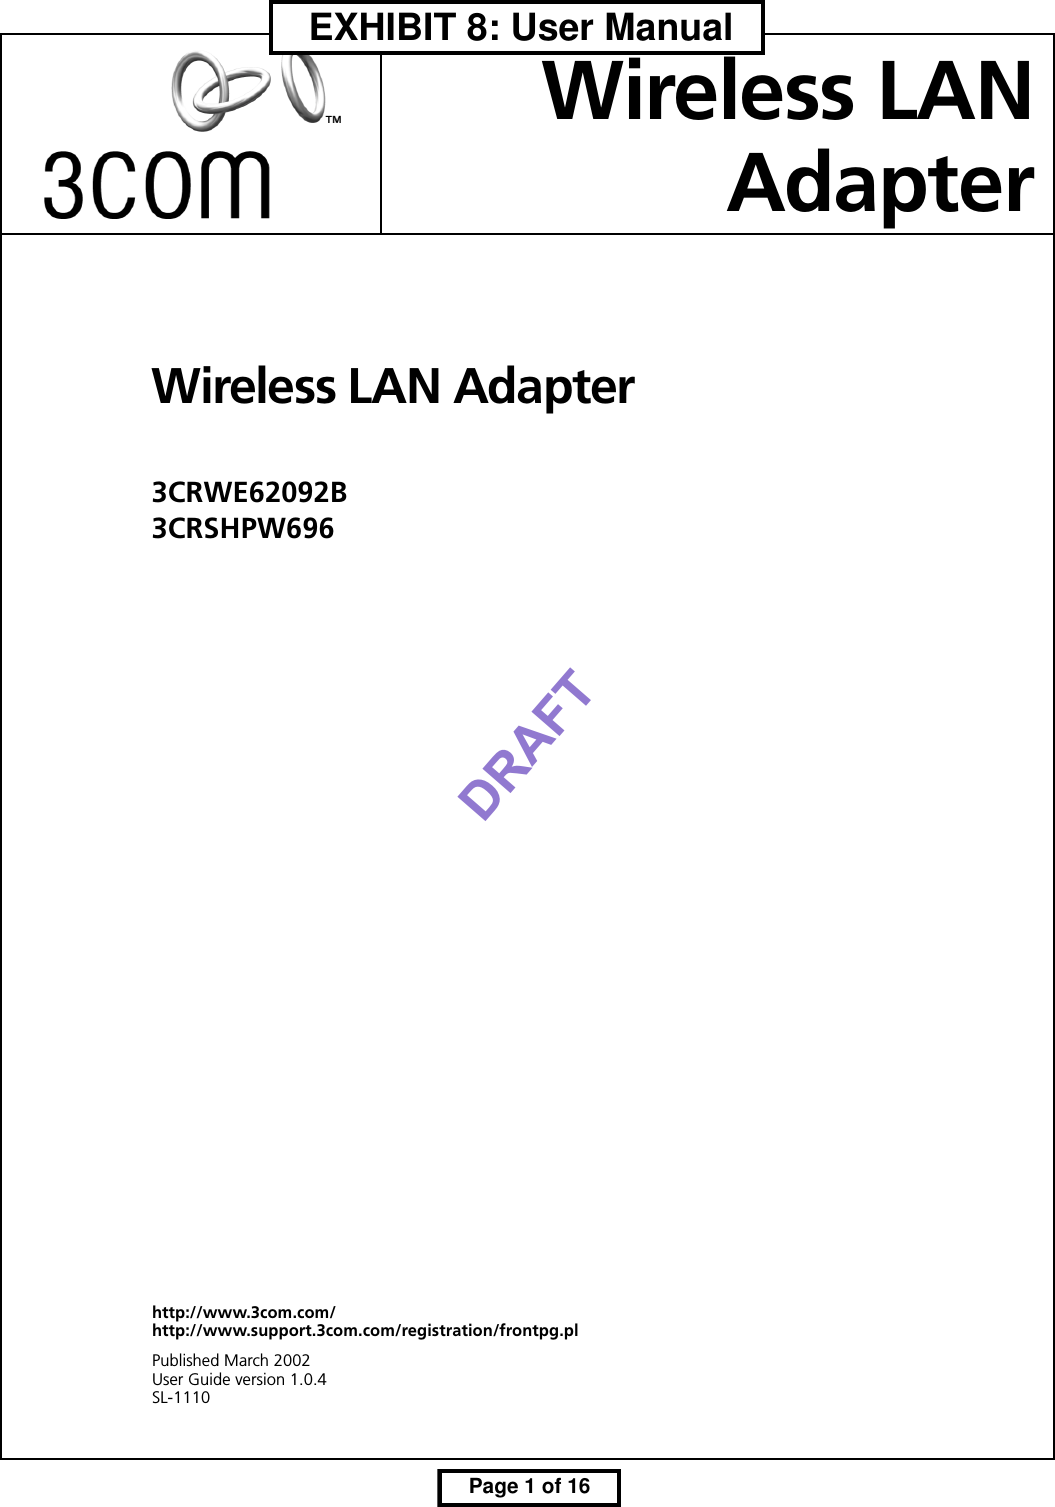 Wireless LAN Adapter3CRWE62092B3CRSHPW696Wireless LANAdapterhttp://www.3com.com/http://www.support.3com.com/registration/frontpg.plPublished March 2002User Guide version 1.0.4SL-1110   EXHIBIT 8: User Manual    Page 1 of 16